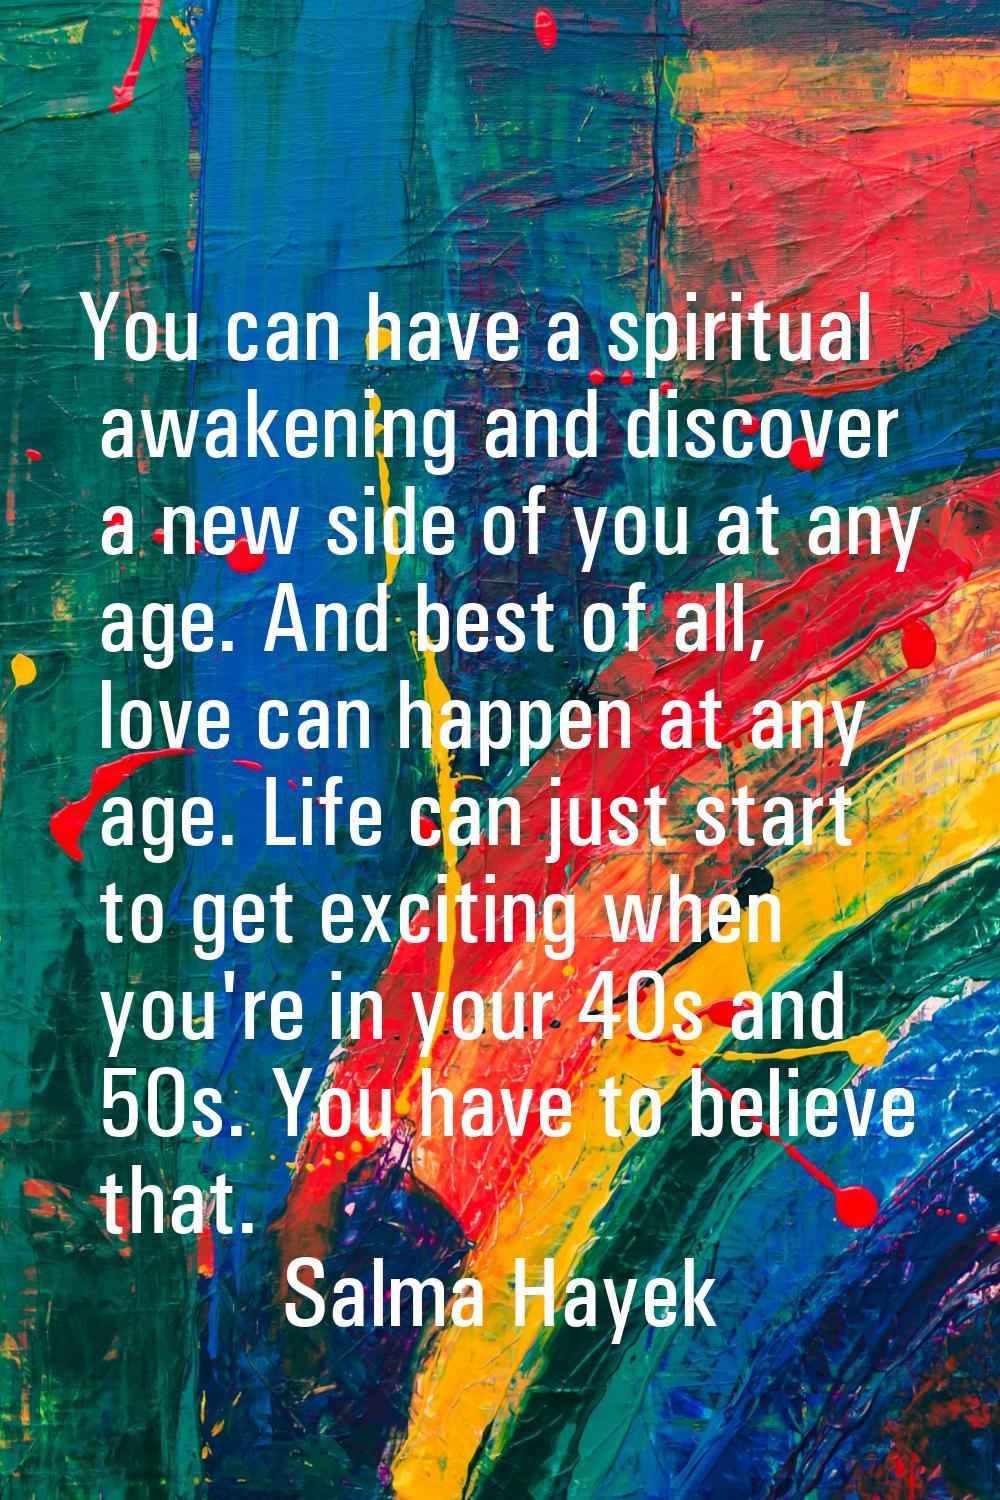 You can have a spiritual awakening and discover a new side of you at any age. And best of all, love